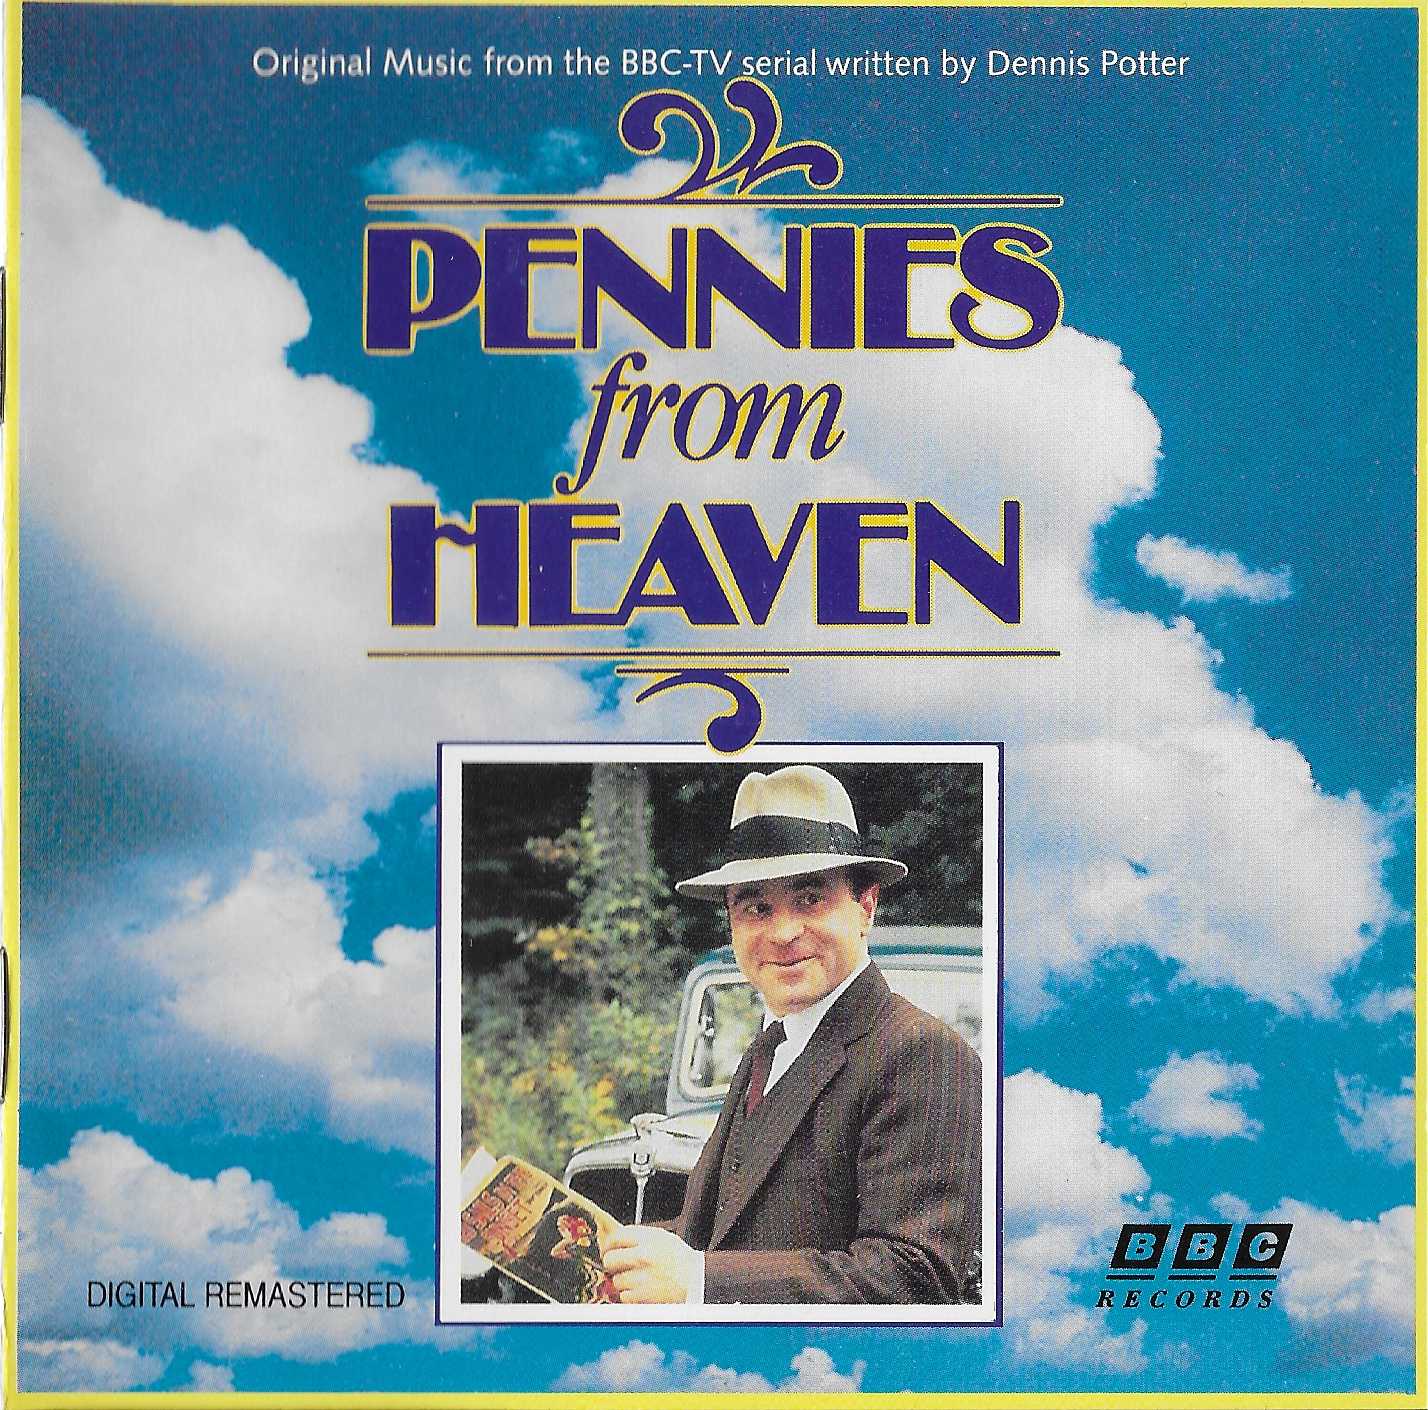 Picture of BBCCD7791 Pennies from Heaven by artist Various from the BBC cds - Records and Tapes library